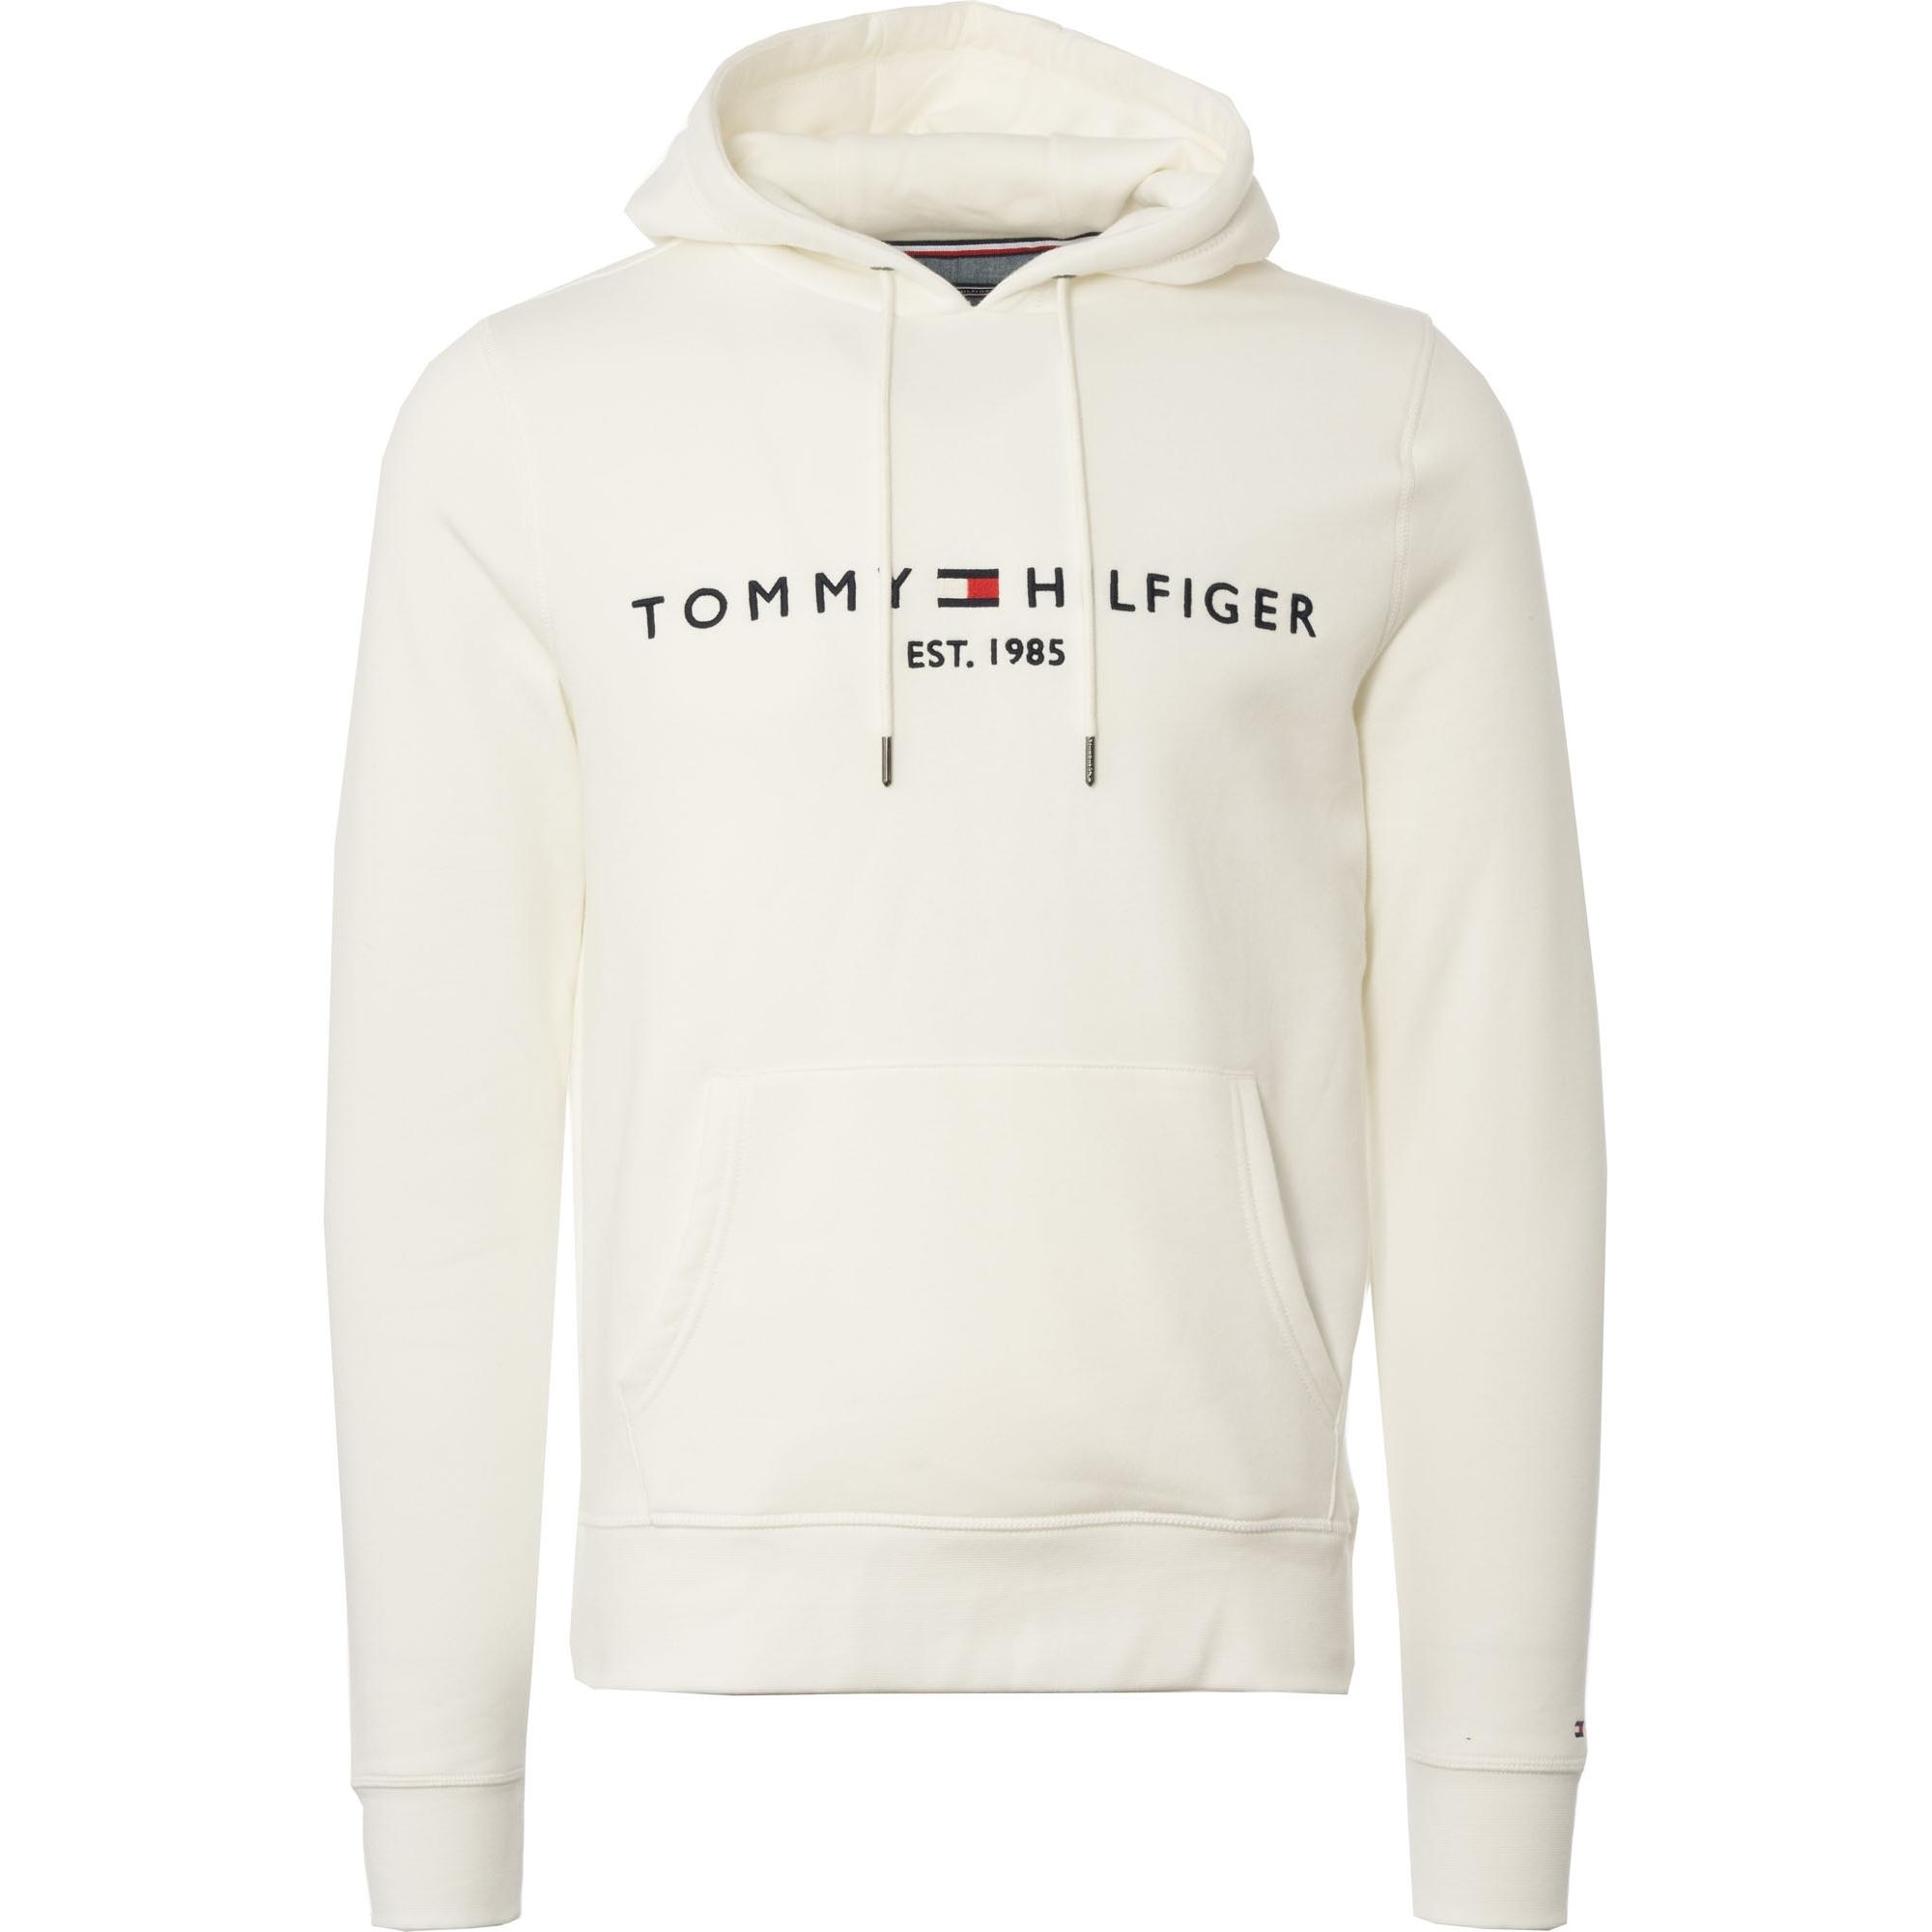 Tommy Hilfiger Logo Print Hoodie in White for Men - Save 24% - Lyst